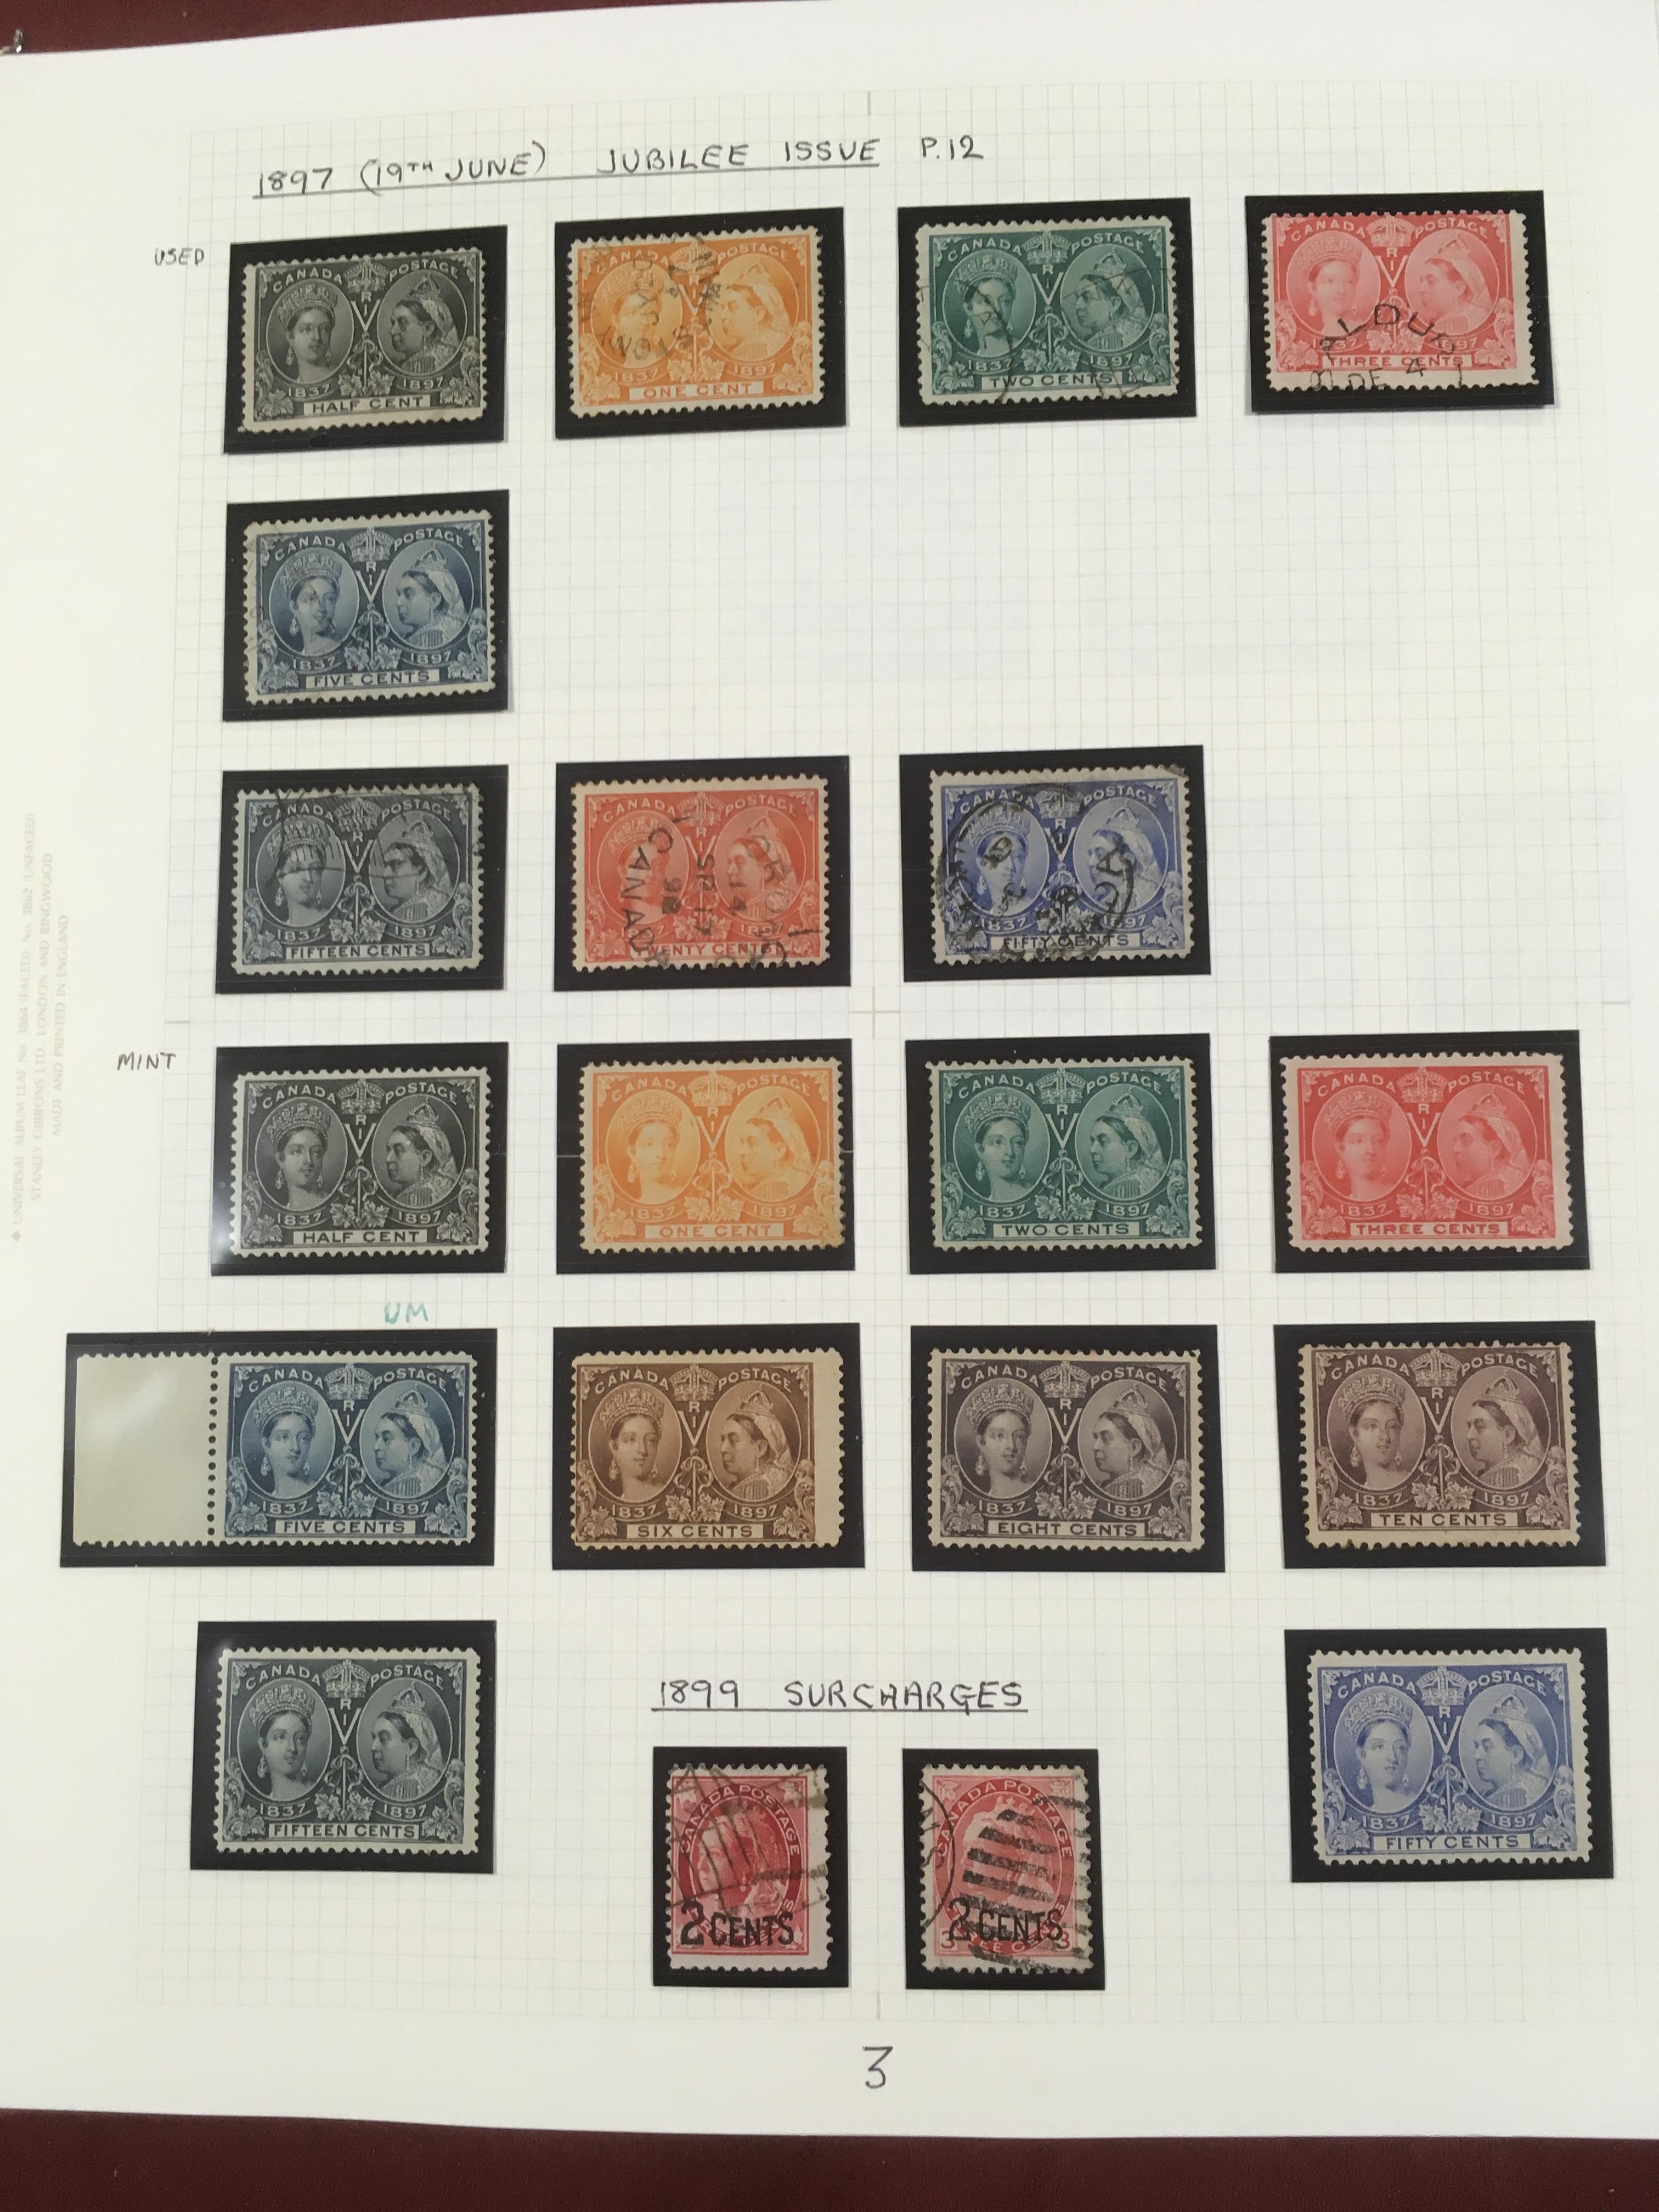 CANADA: 1859-1999 COLLECTION IN TWO ALBU - Image 2 of 4